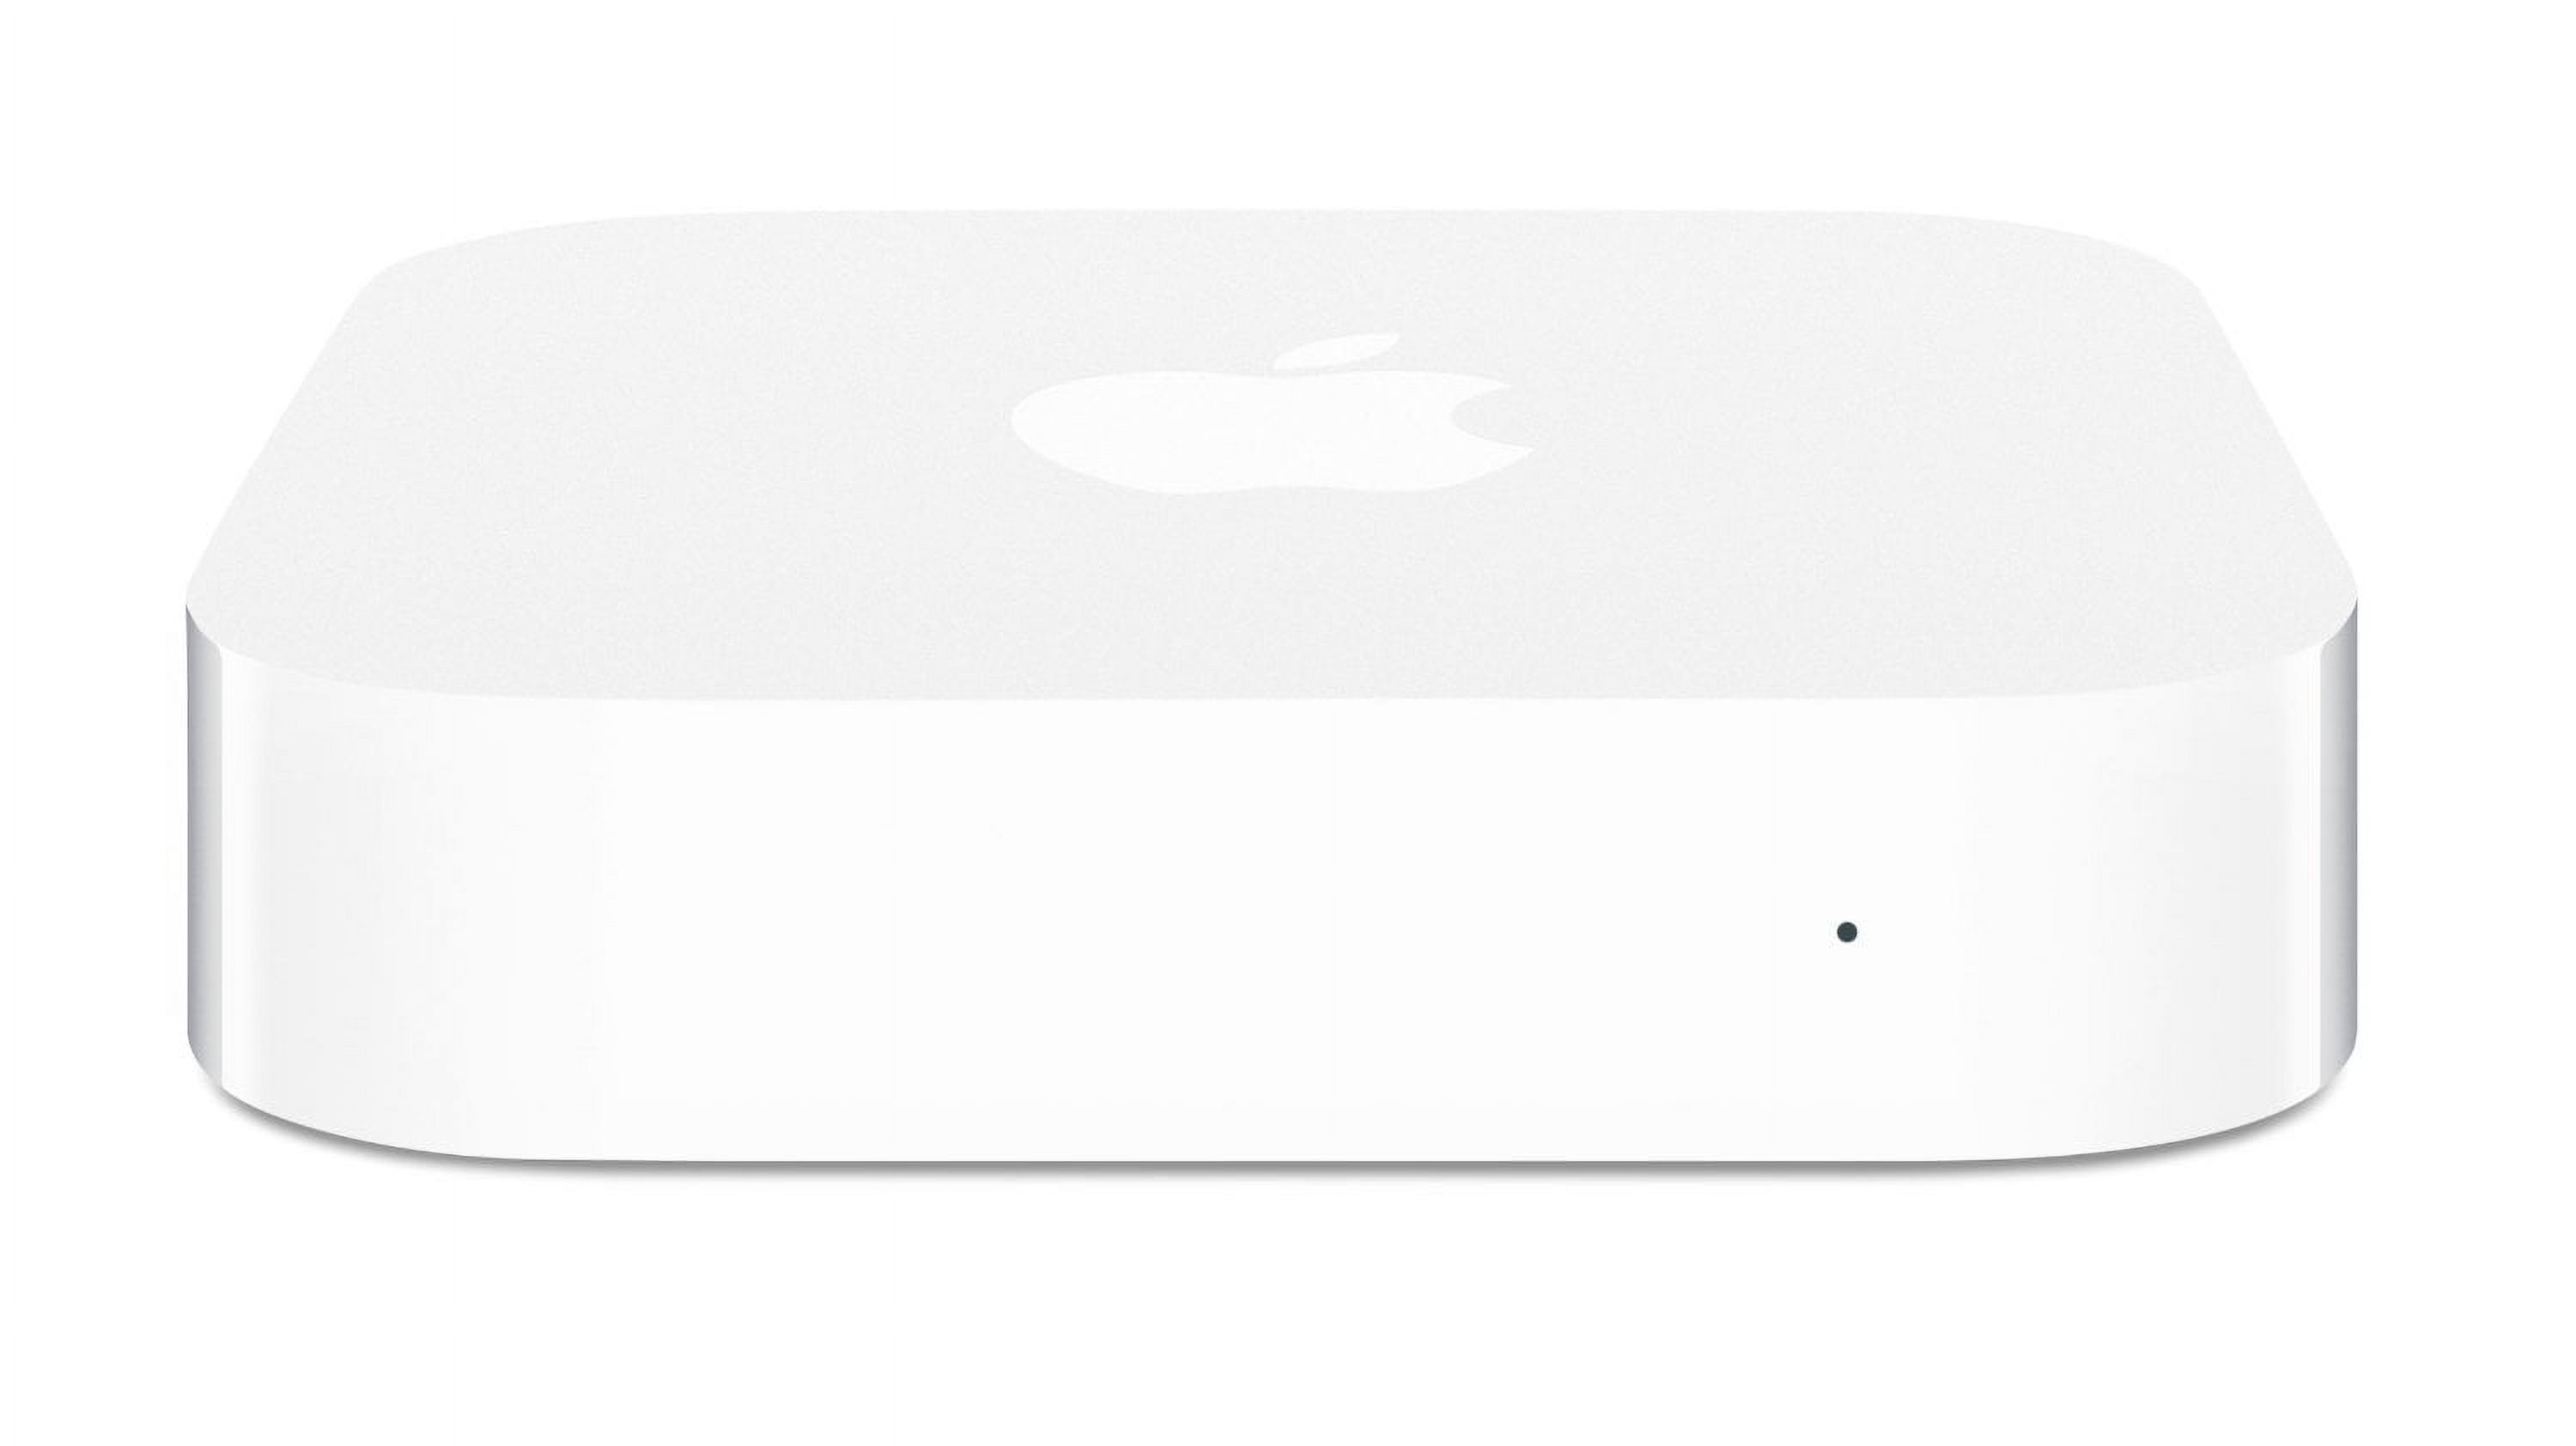 AIRPORT EXPRESS BASE STATION - image 3 of 5